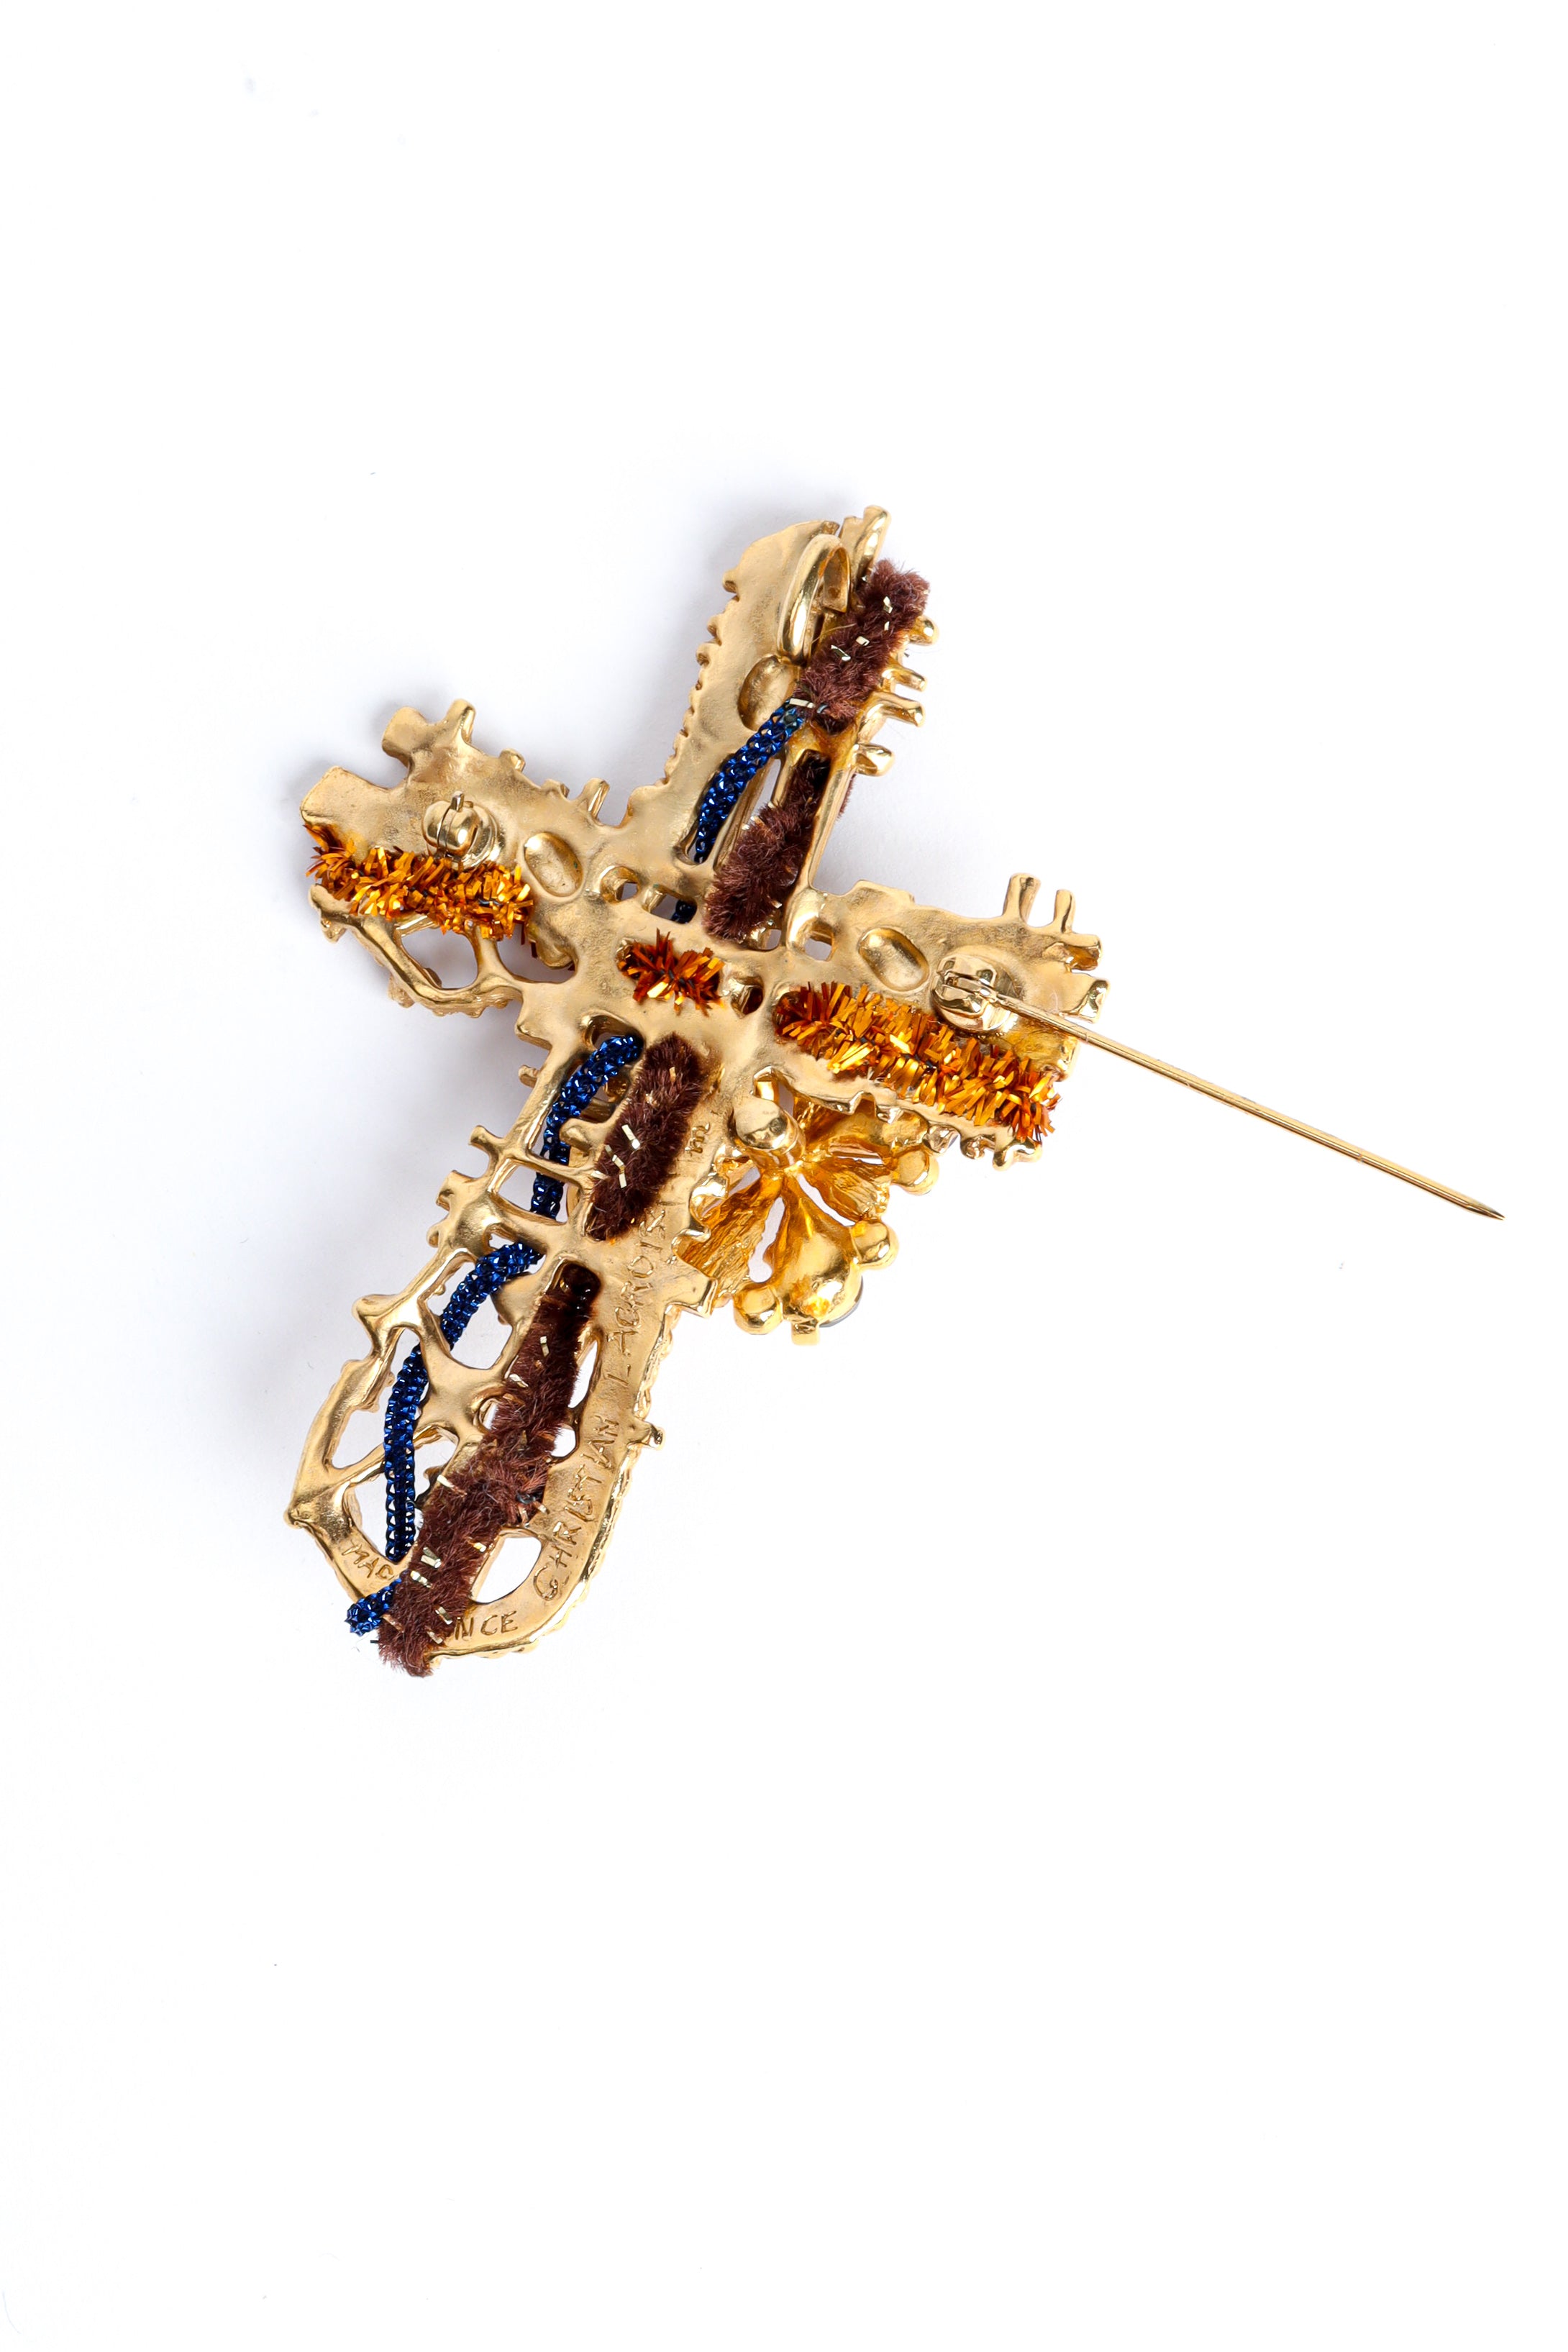 Vintage Christian Lacroix Abstract Cross Pendant Brooch back at Recess Los Angeles